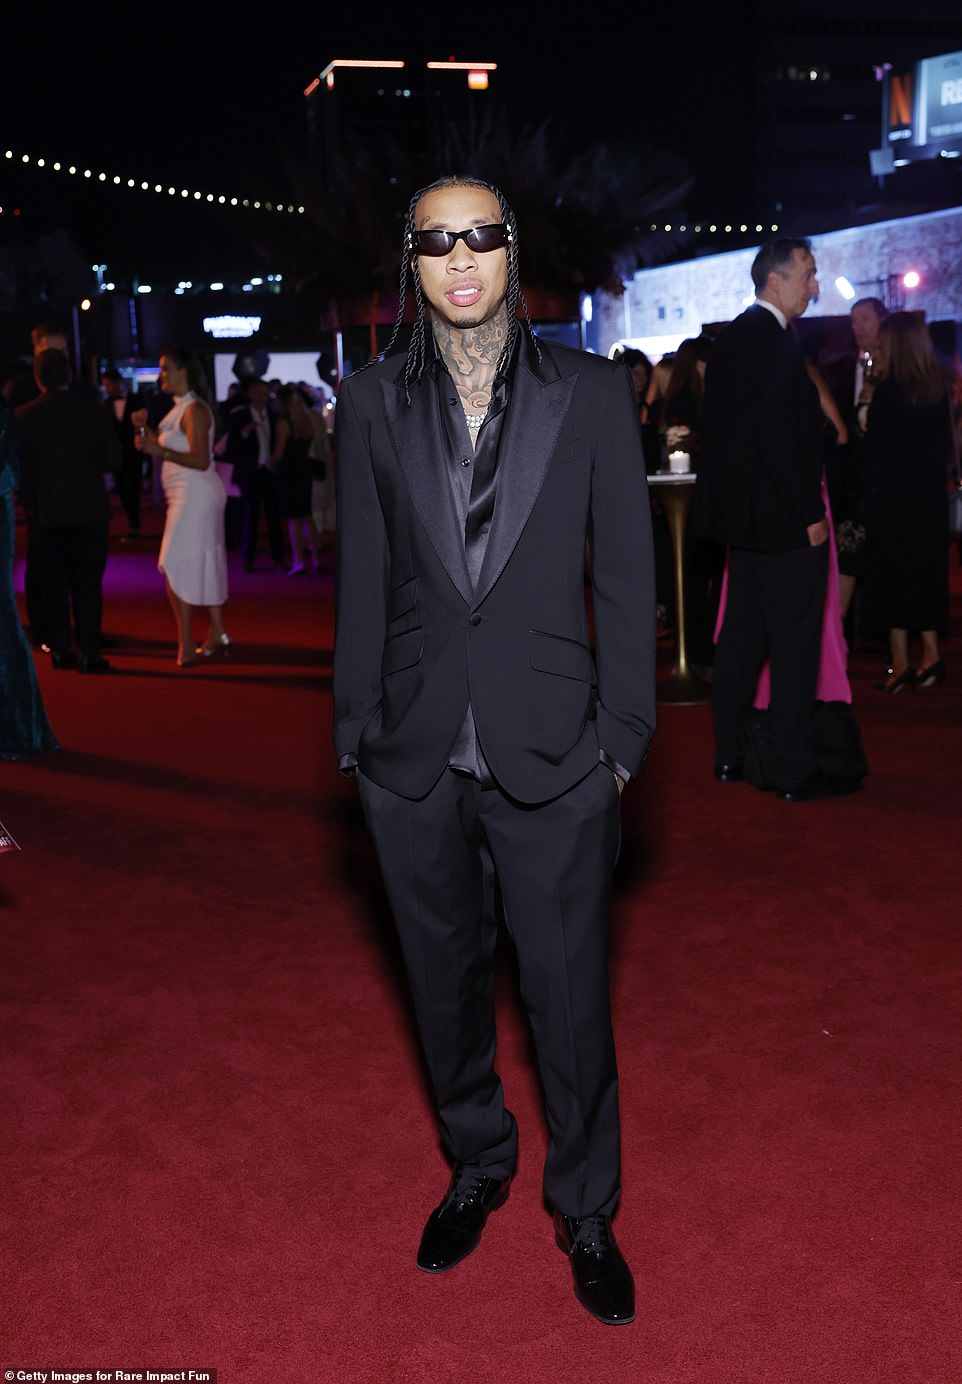 Tyga also offered a smile on the sidelines before getting in front of cameras on the red carpet